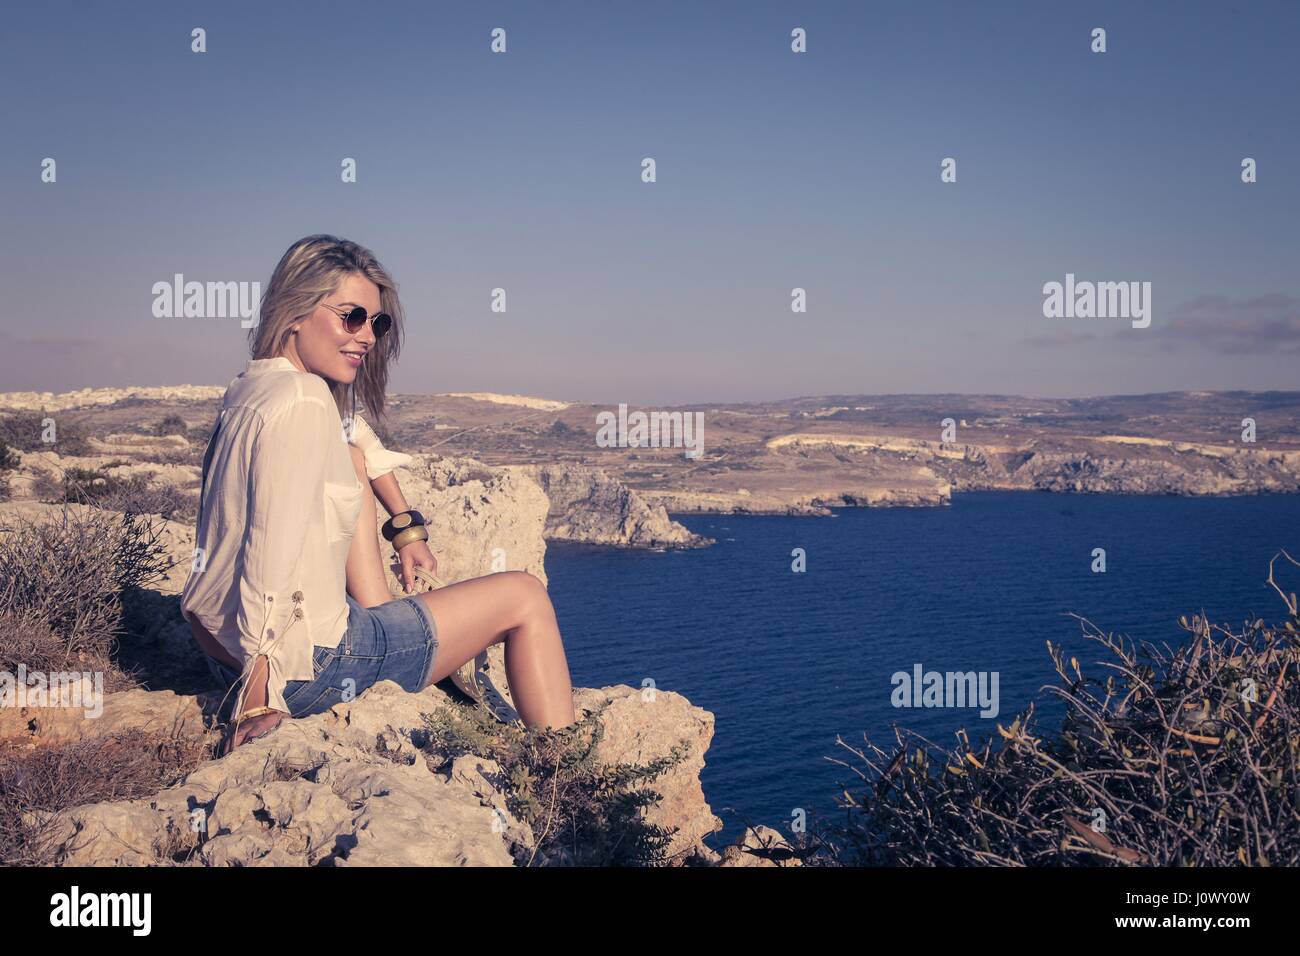 Blonde woman sitting on cliff Banque D'Images